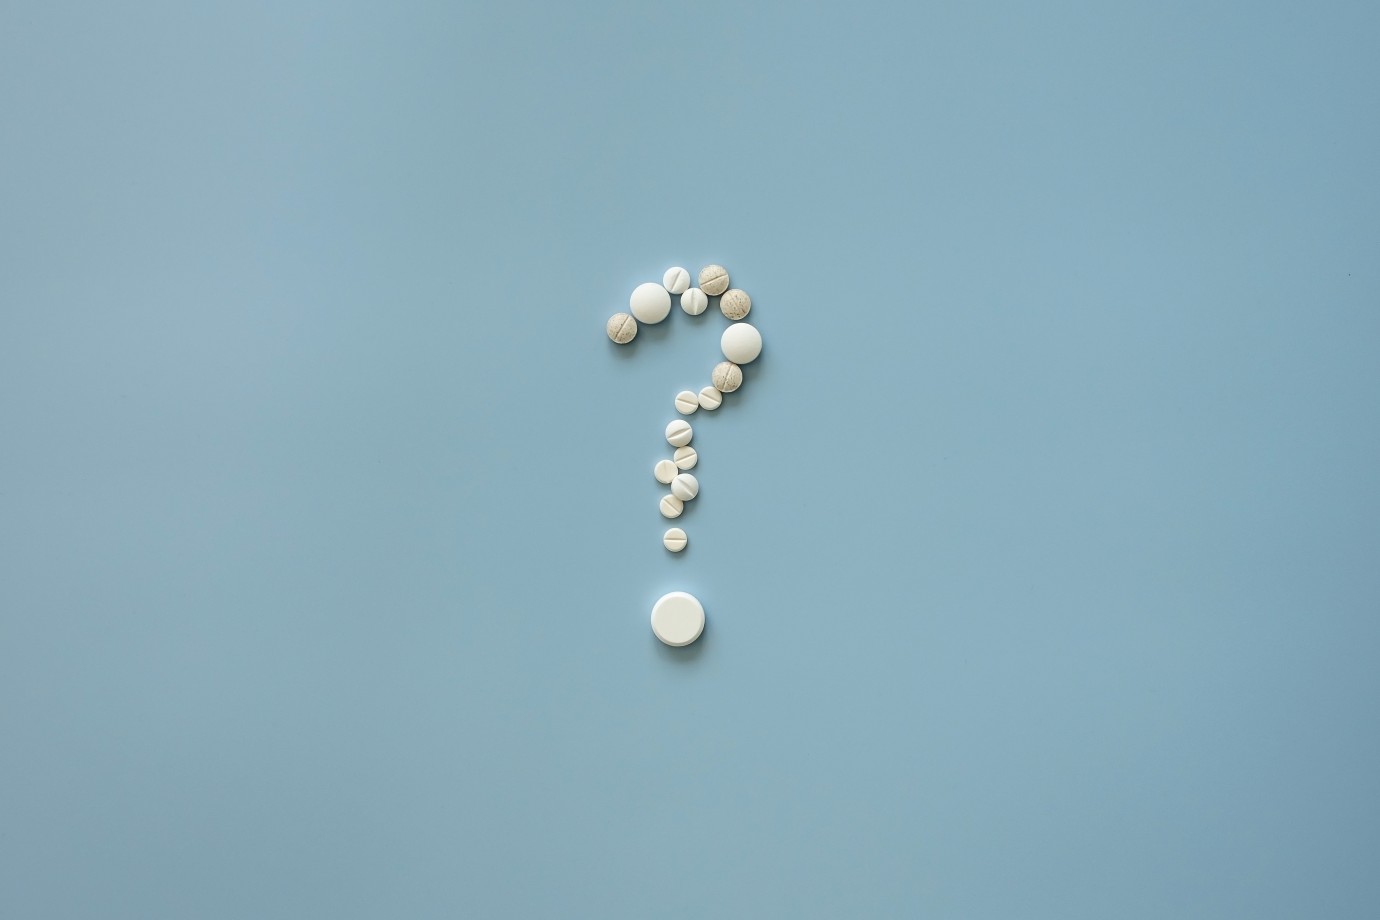 Pills are laid out in the form of a question mark